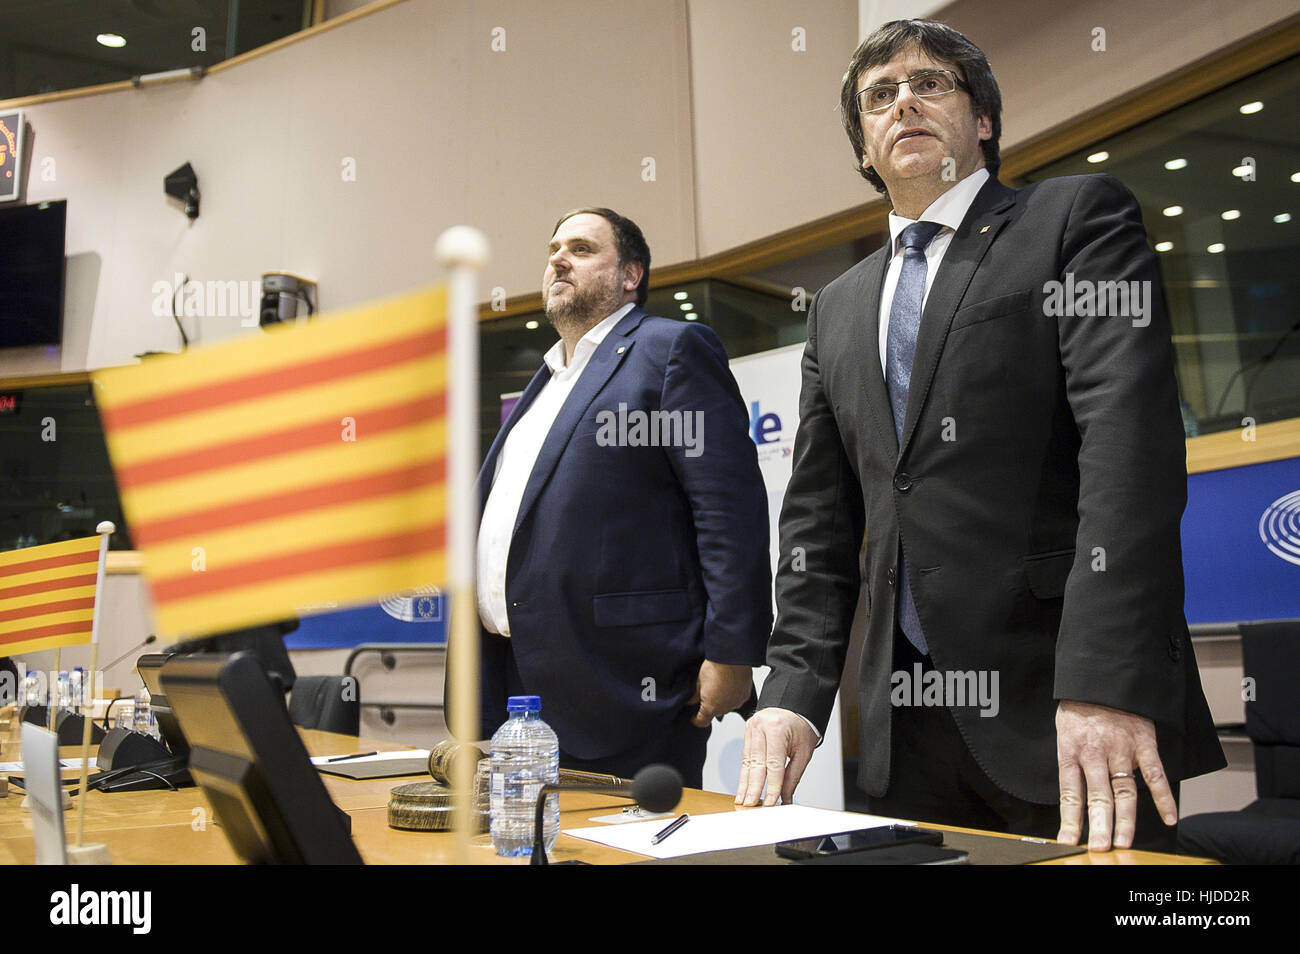 Oriol Janqueras Vice President of the Catalan government of Economy and Treasury (L) and Carles Puigdemont President of the Catalan government take part in the conference on The Catalan Independence Referendum at European Parliament headquarters in Brussels, Belgium on 24.01.2017 by Wiktor Dabkowski | usage worldwide Stock Photo